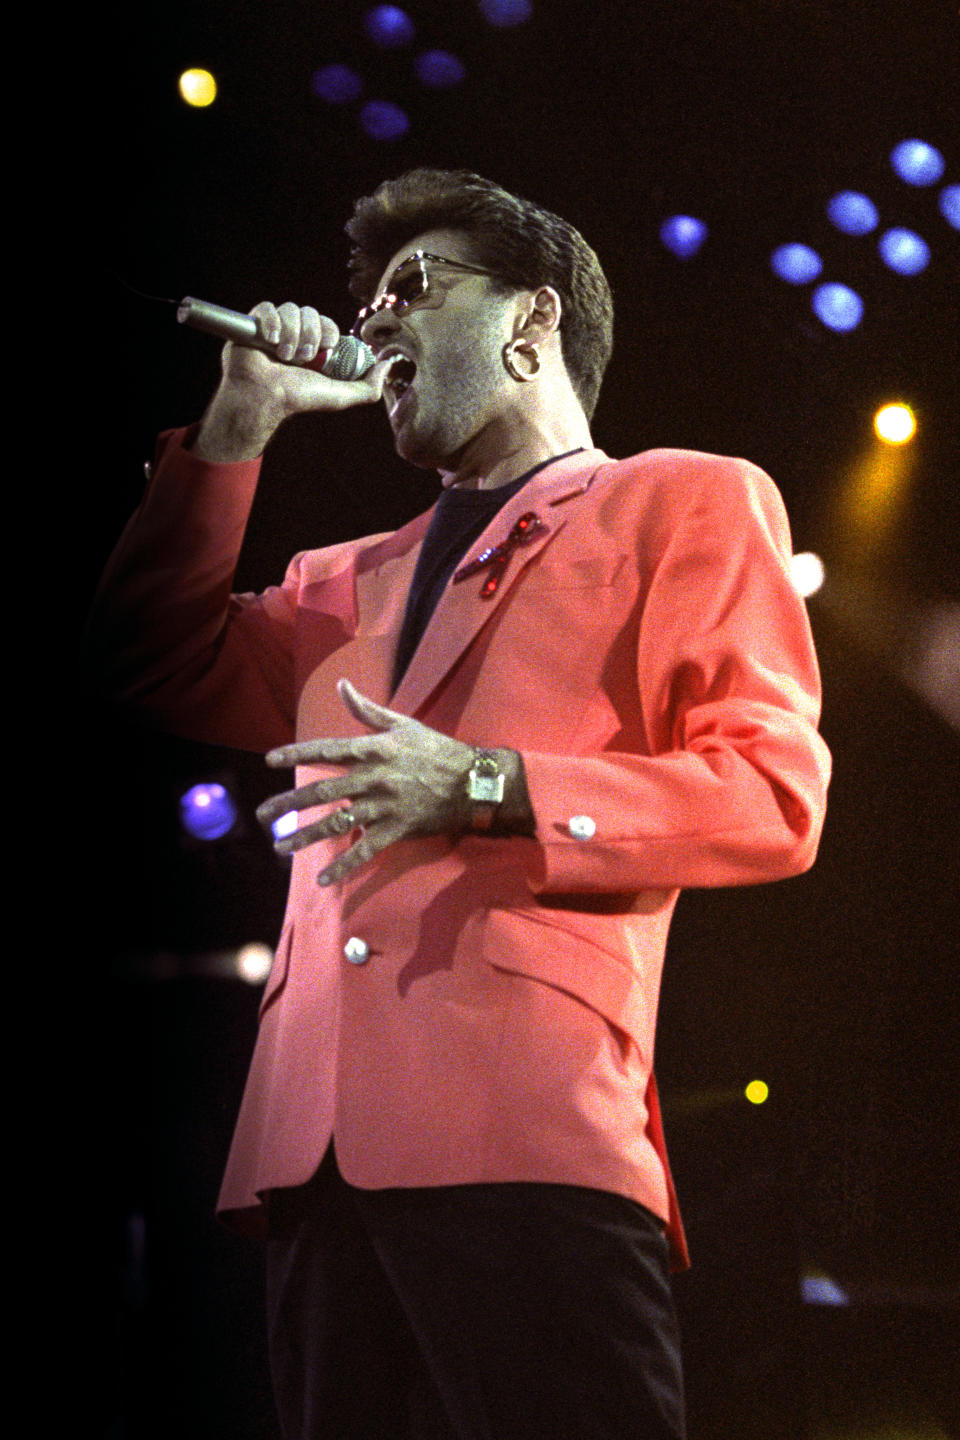 George Michael singing on stage during the concert.